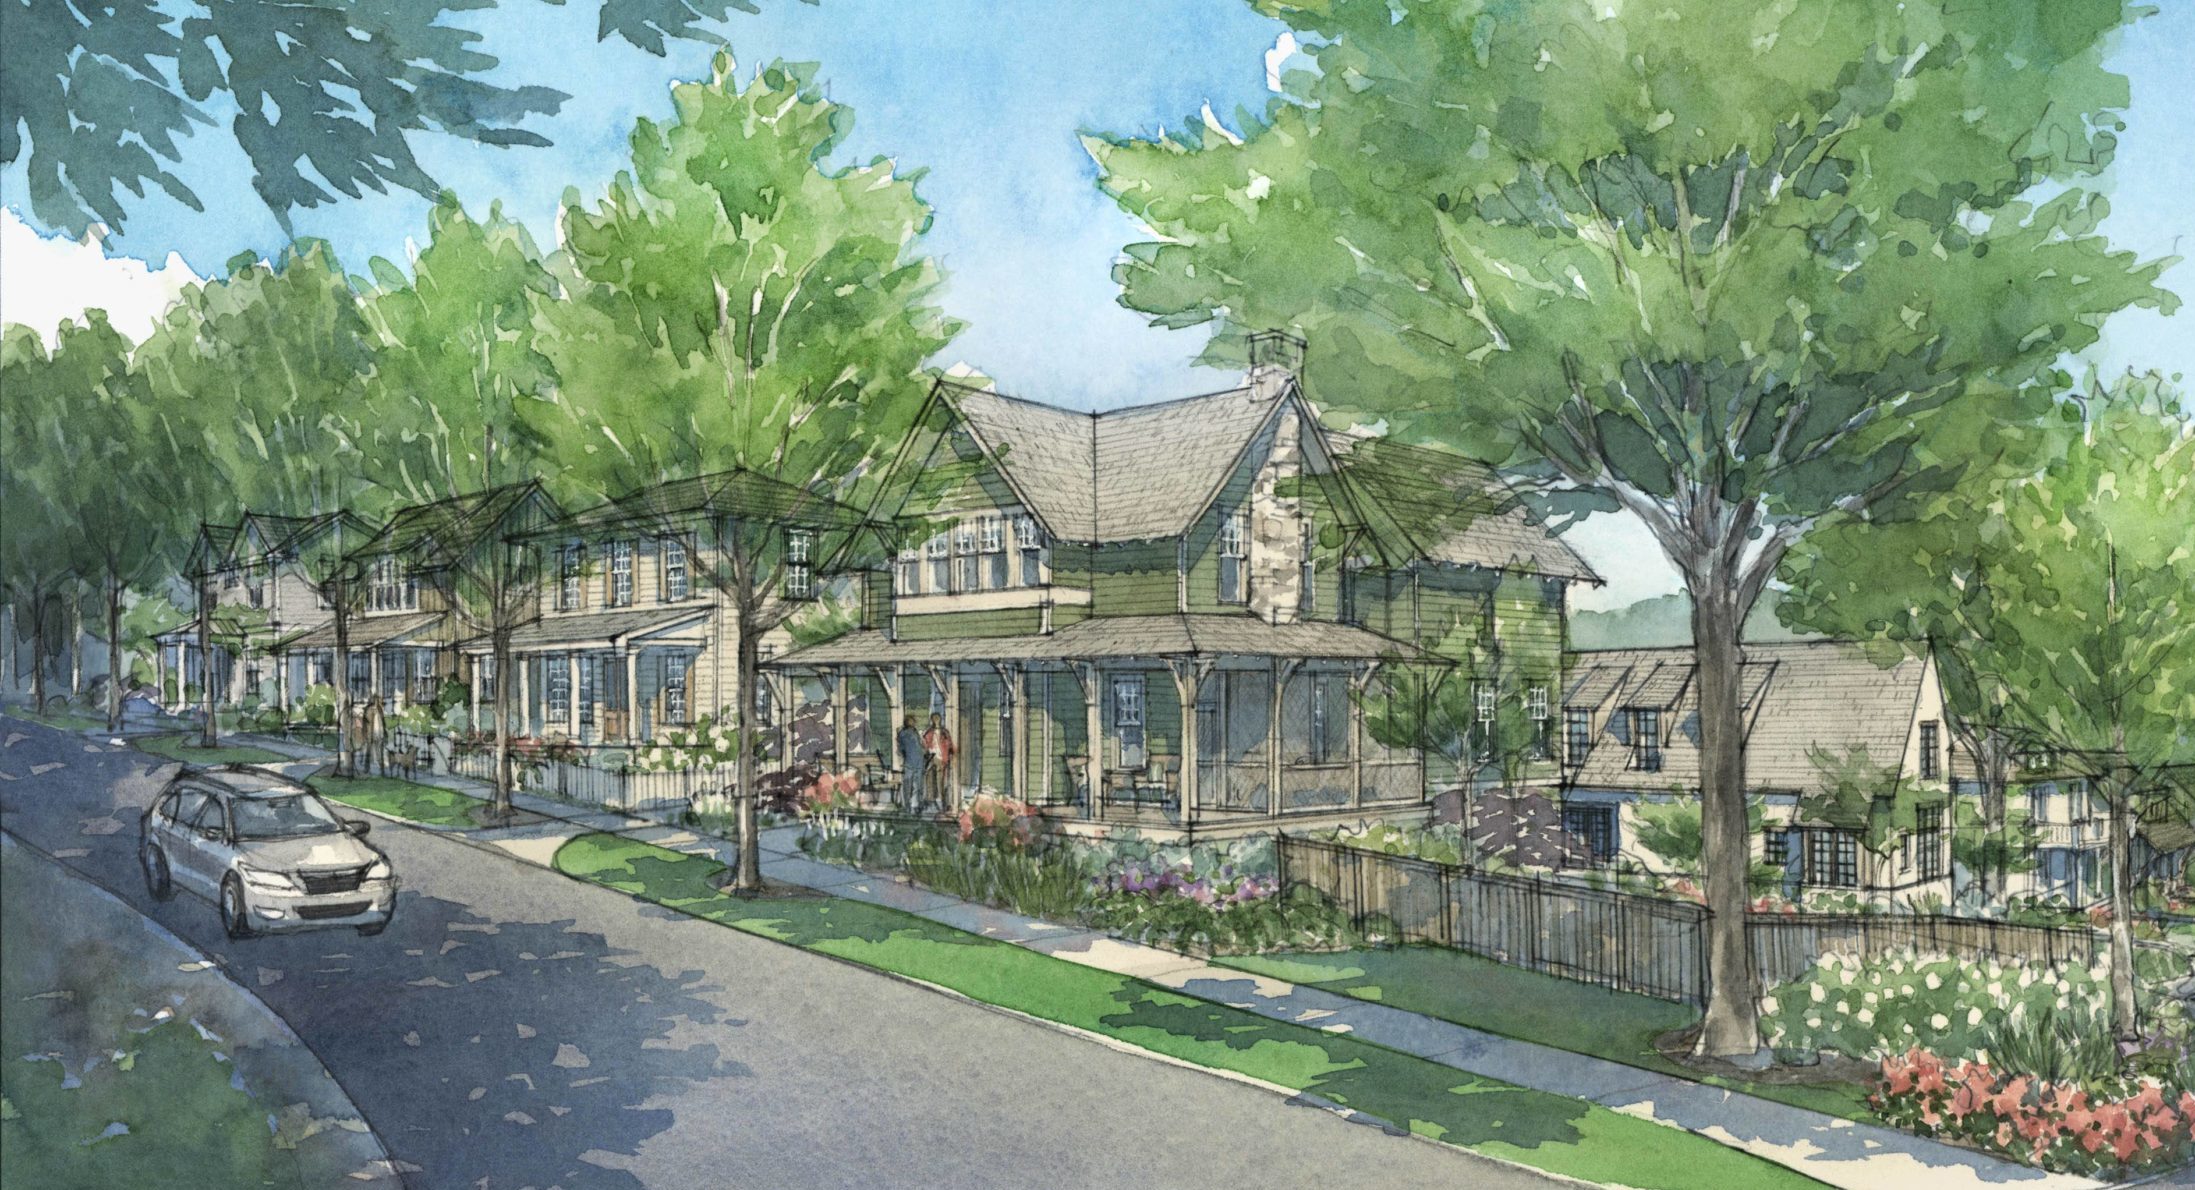 A watercolor rendering shows the intersection of Cross Ave and Markham Road with street trees and a series of traditional style two story homes.